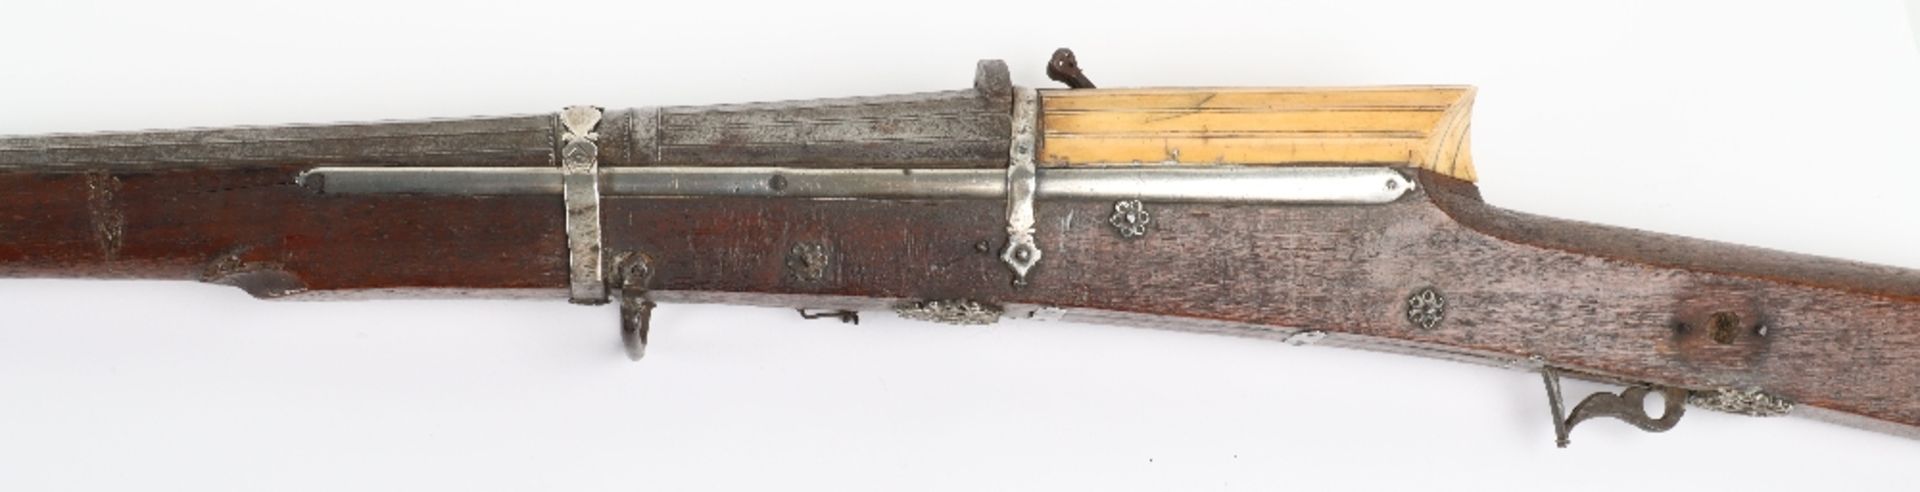 ^ Good Quality 25 Bore Indian Matchlock Gun Torador from Rajasthan, Probably Rajput c.1800 - Image 12 of 14